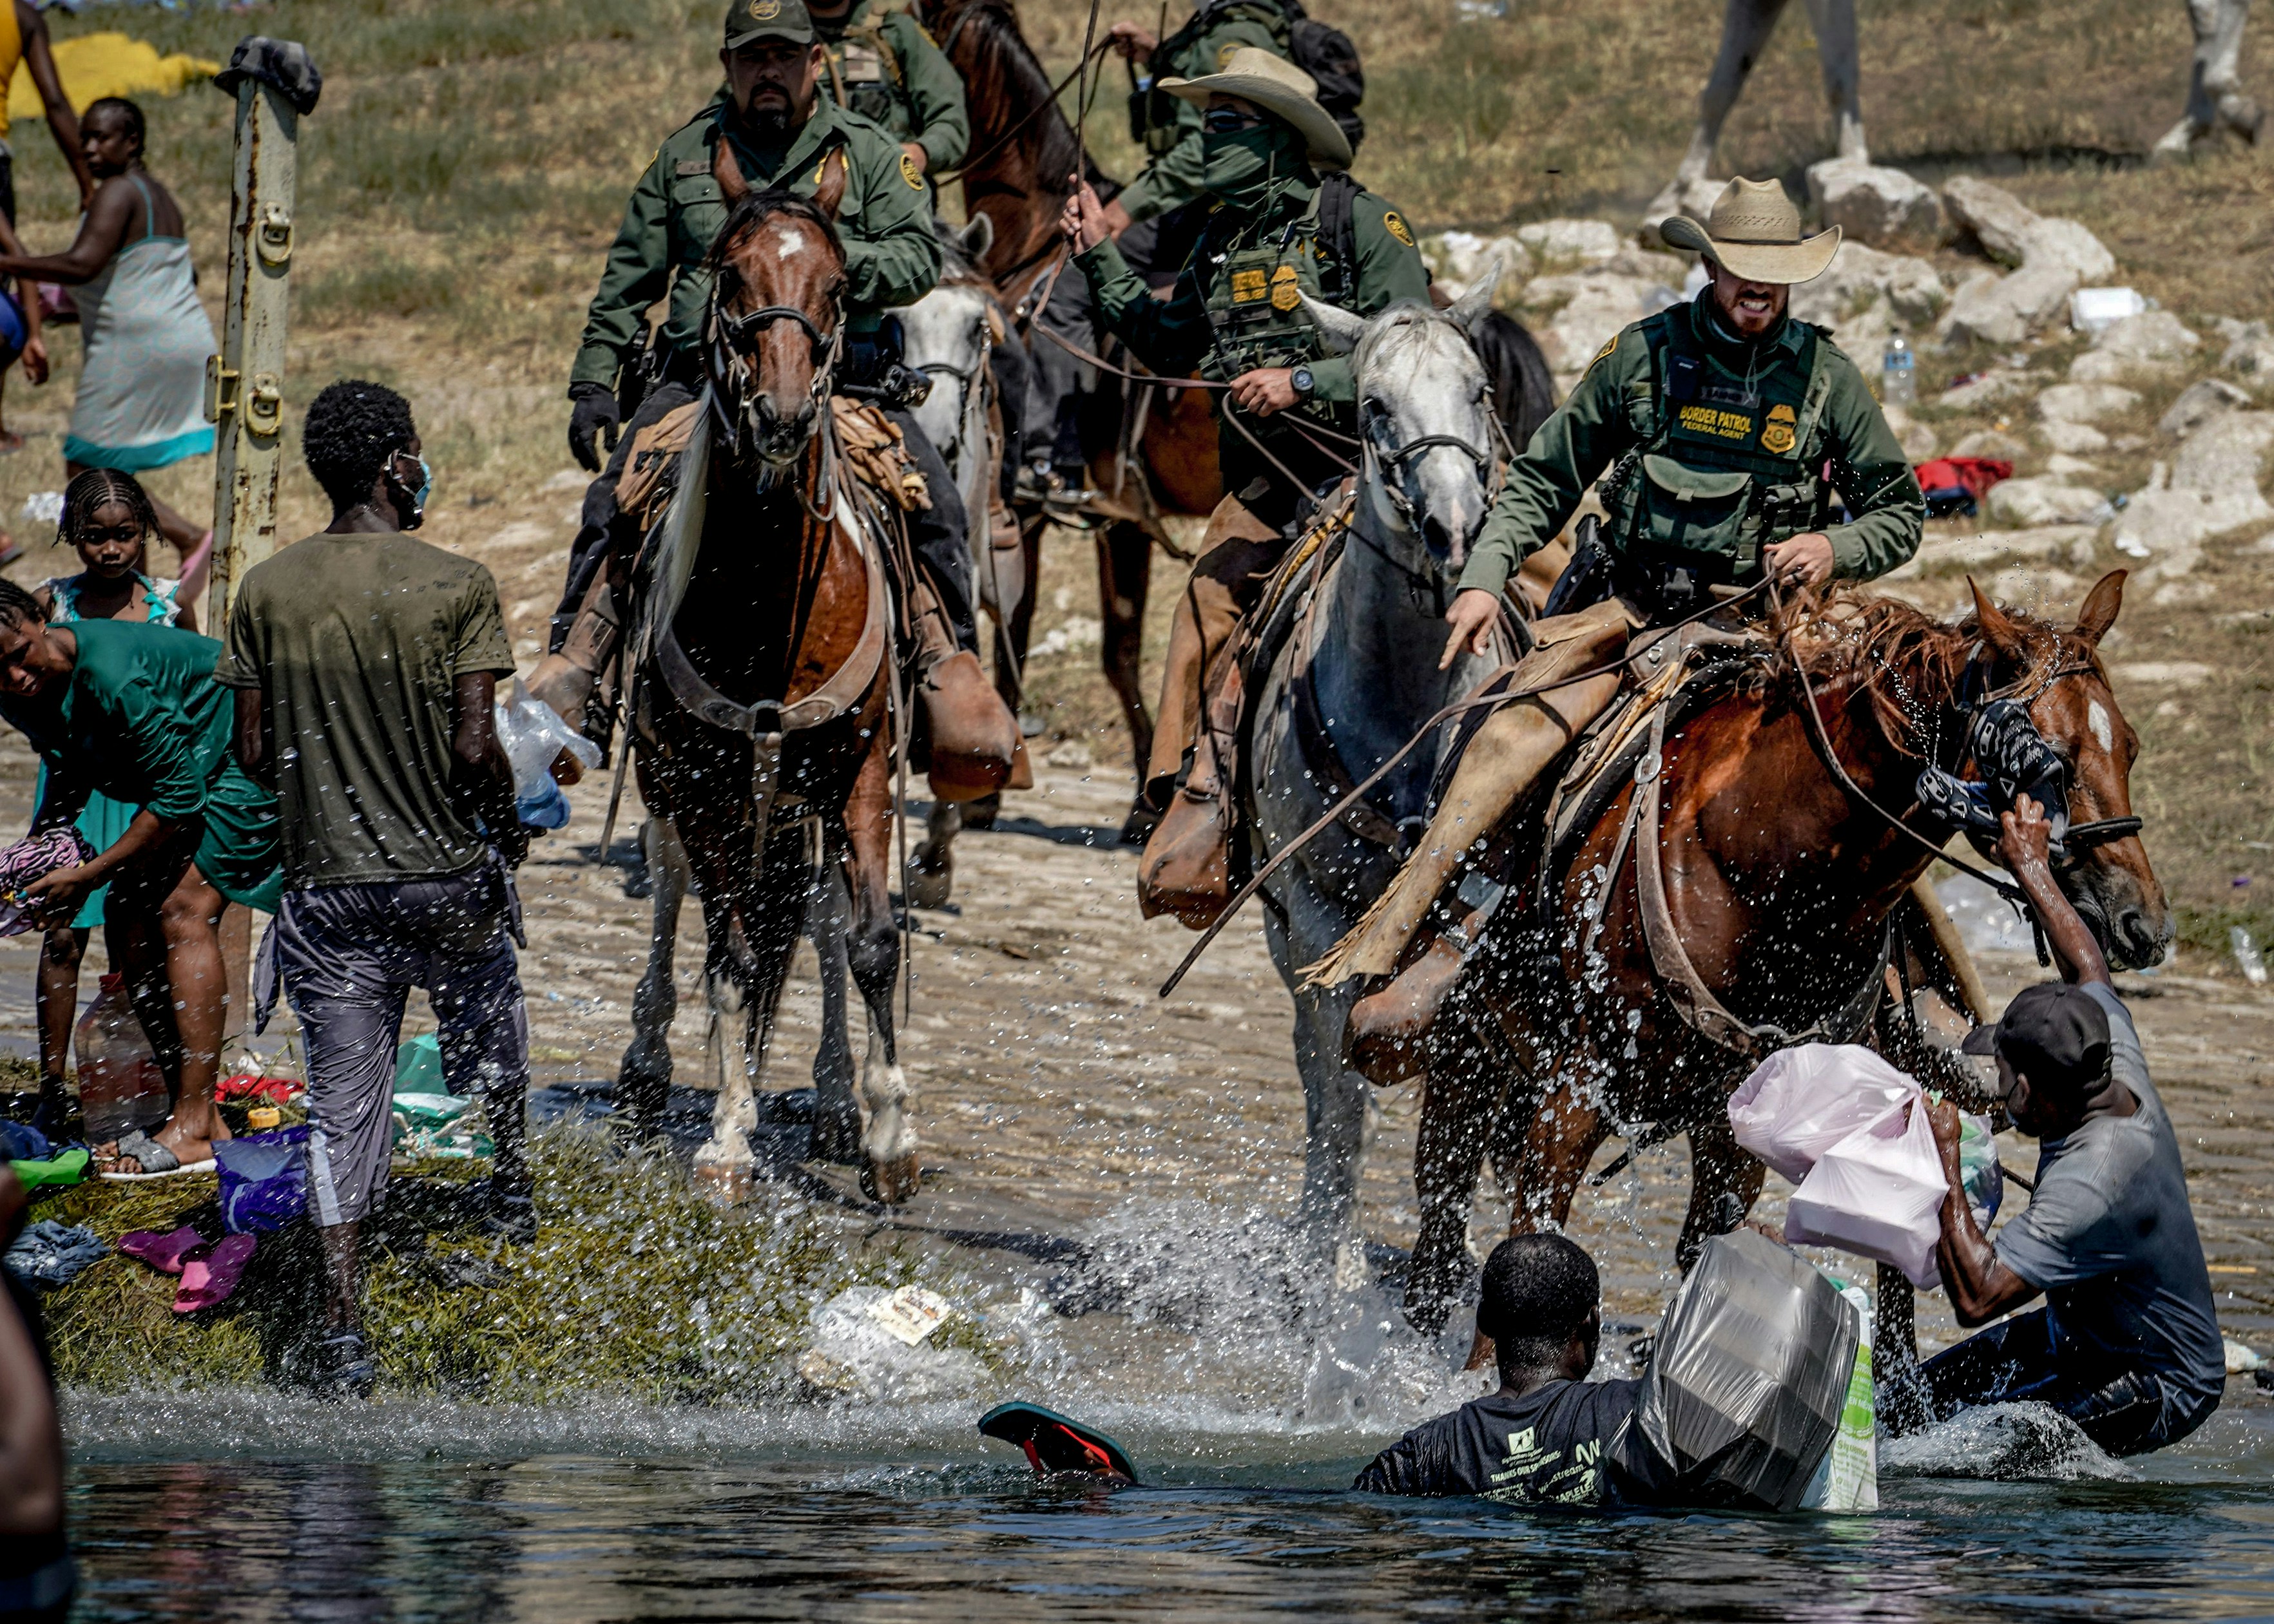 United States Border Patrol agents on horseback tries to stop Haitian migrants from entering an encampment on the banks of the Rio Grande near the Acuna Del Rio International Bridge in Del Rio, Texas on September 19, 2021. - The United States said Saturday it would ramp up deportation flights for thousands of migrants who flooded into the Texas border city of Del Rio, as authorities scramble to alleviate a burgeoning crisis for President Joe Biden's administration. (Photo by PAUL RATJE / AFP) (Photo by PAUL RATJE/AFP via Getty Images)